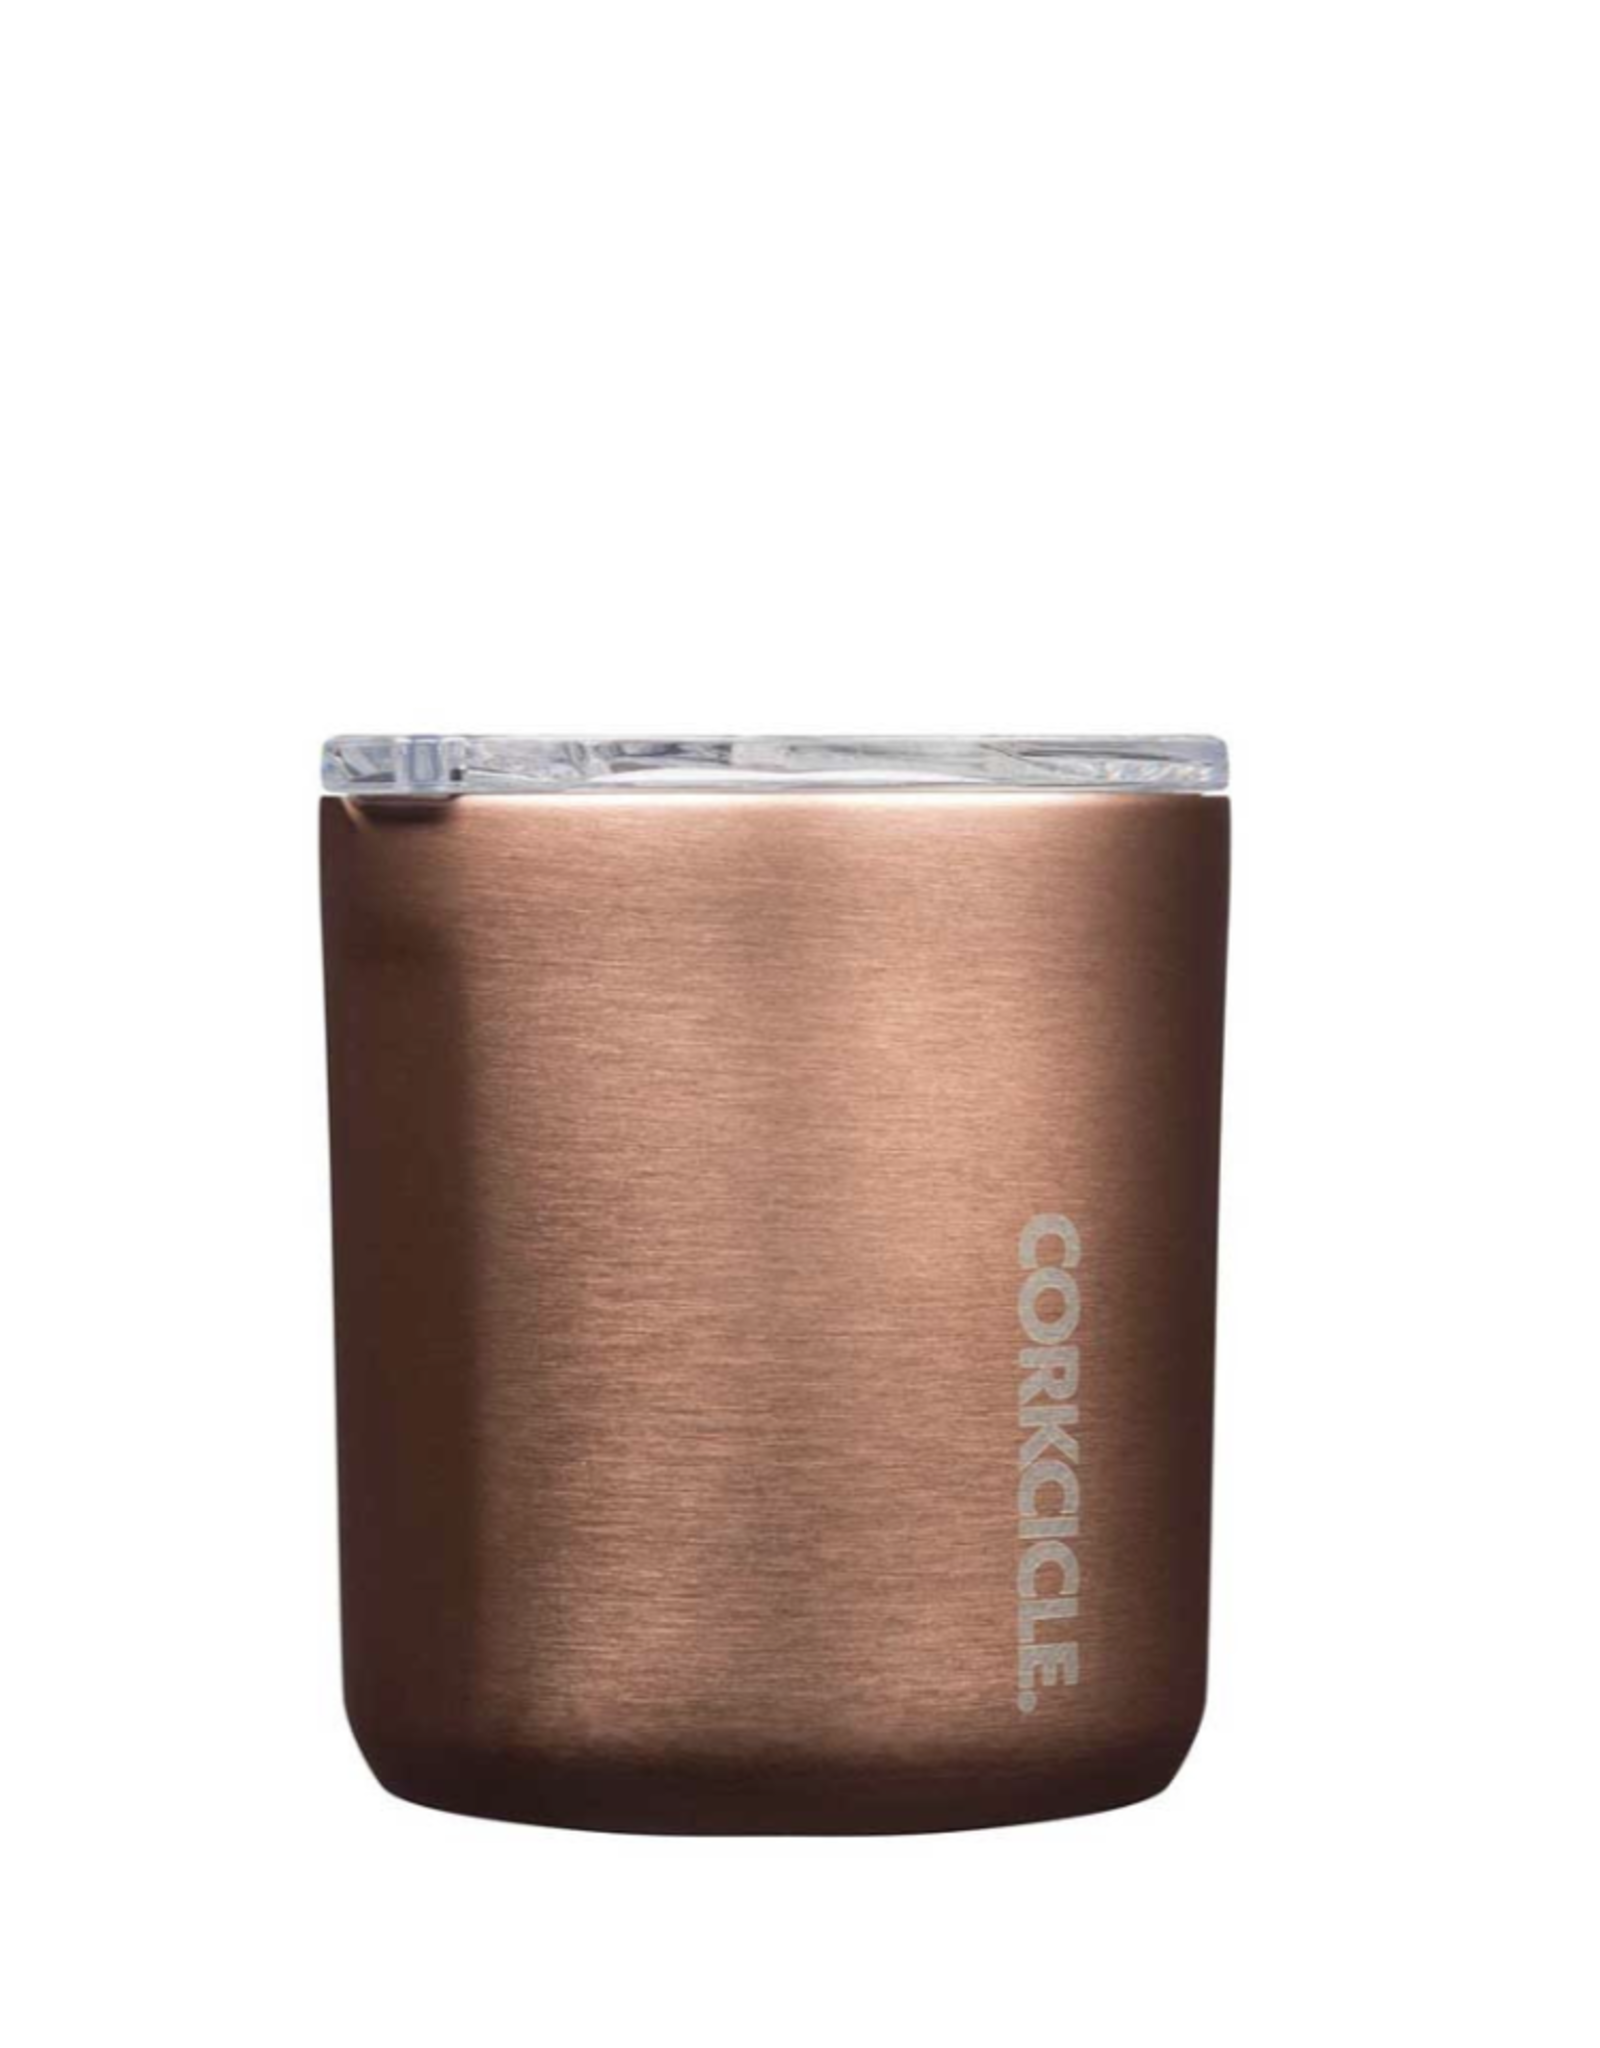 Corkcicle Corkcicle Copper Collection